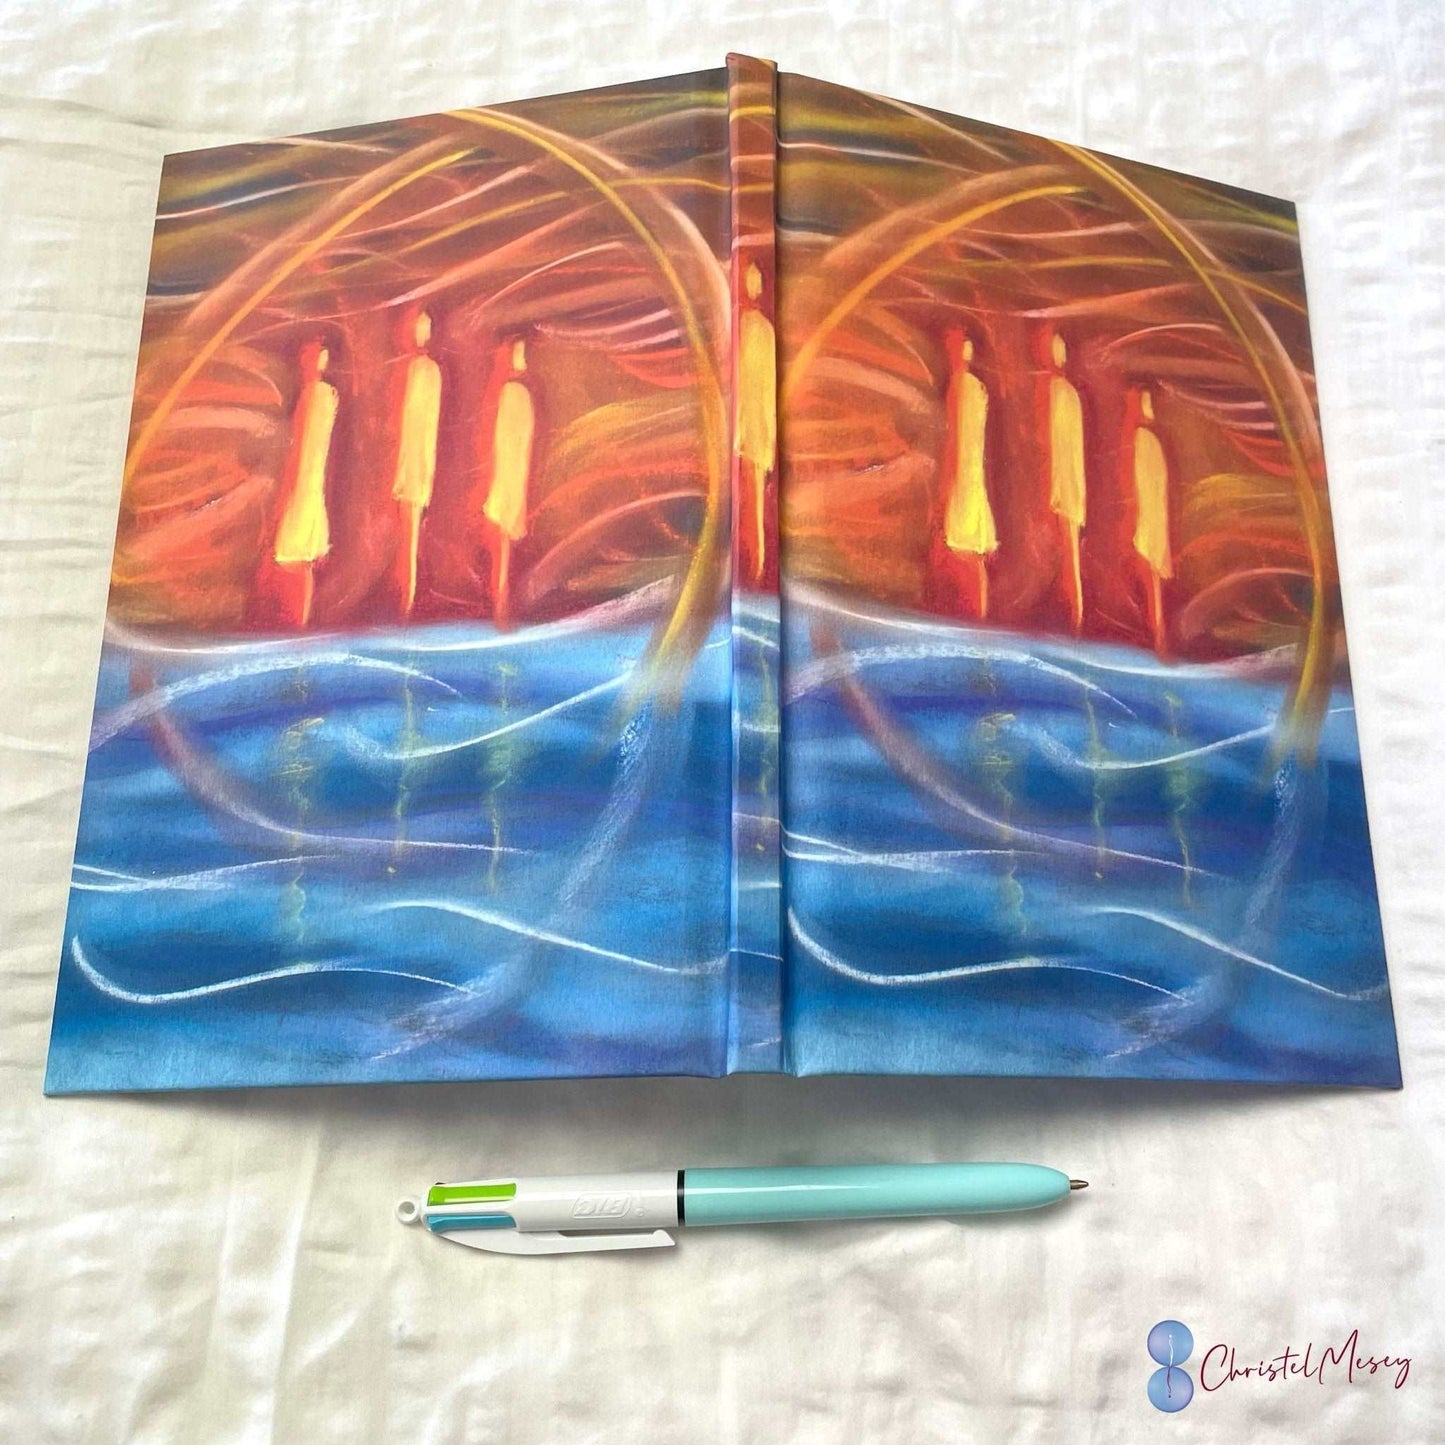 NOTEBOOK - FireNOTEBOOK - Fire and Water - Hardcover with Dotted pages